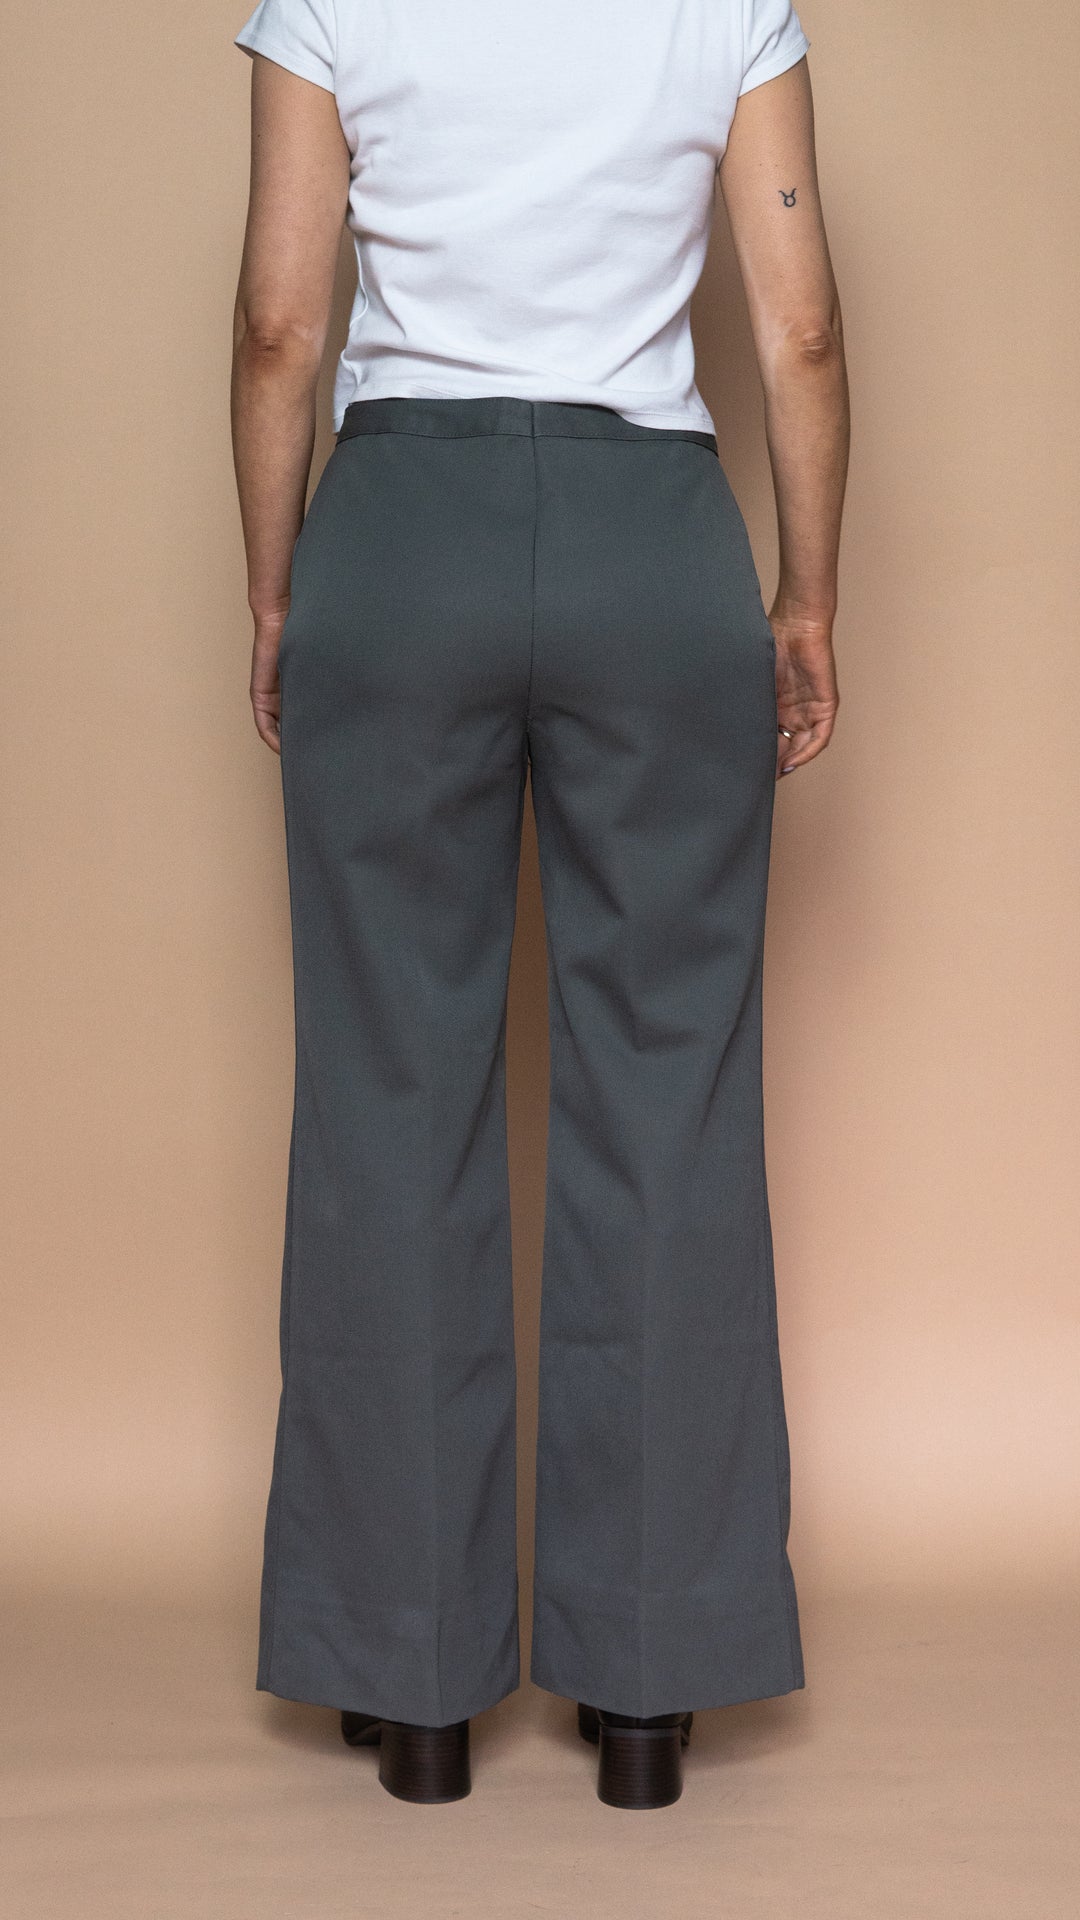 '70s GREY WIDE LEG FLARES - Size M